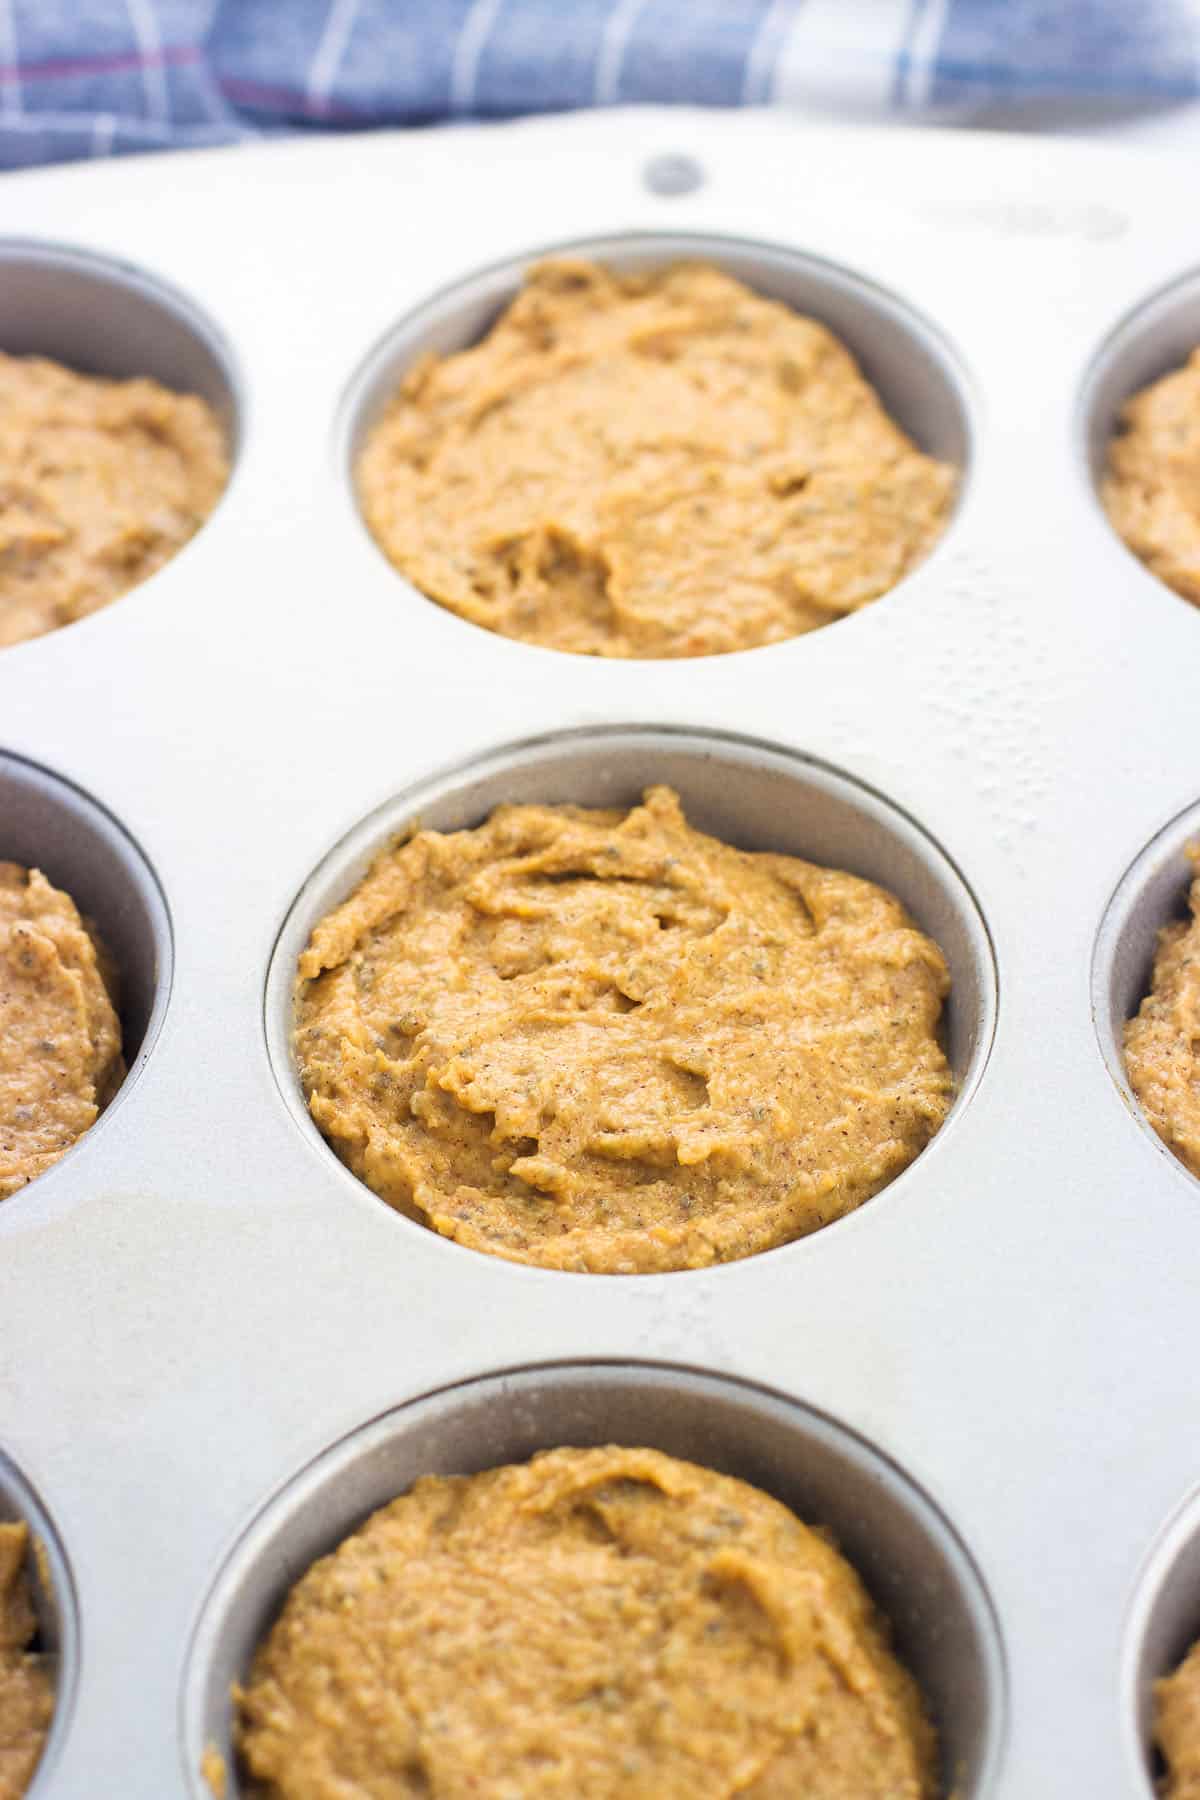 Batter portioned out into a metal muffin pan.